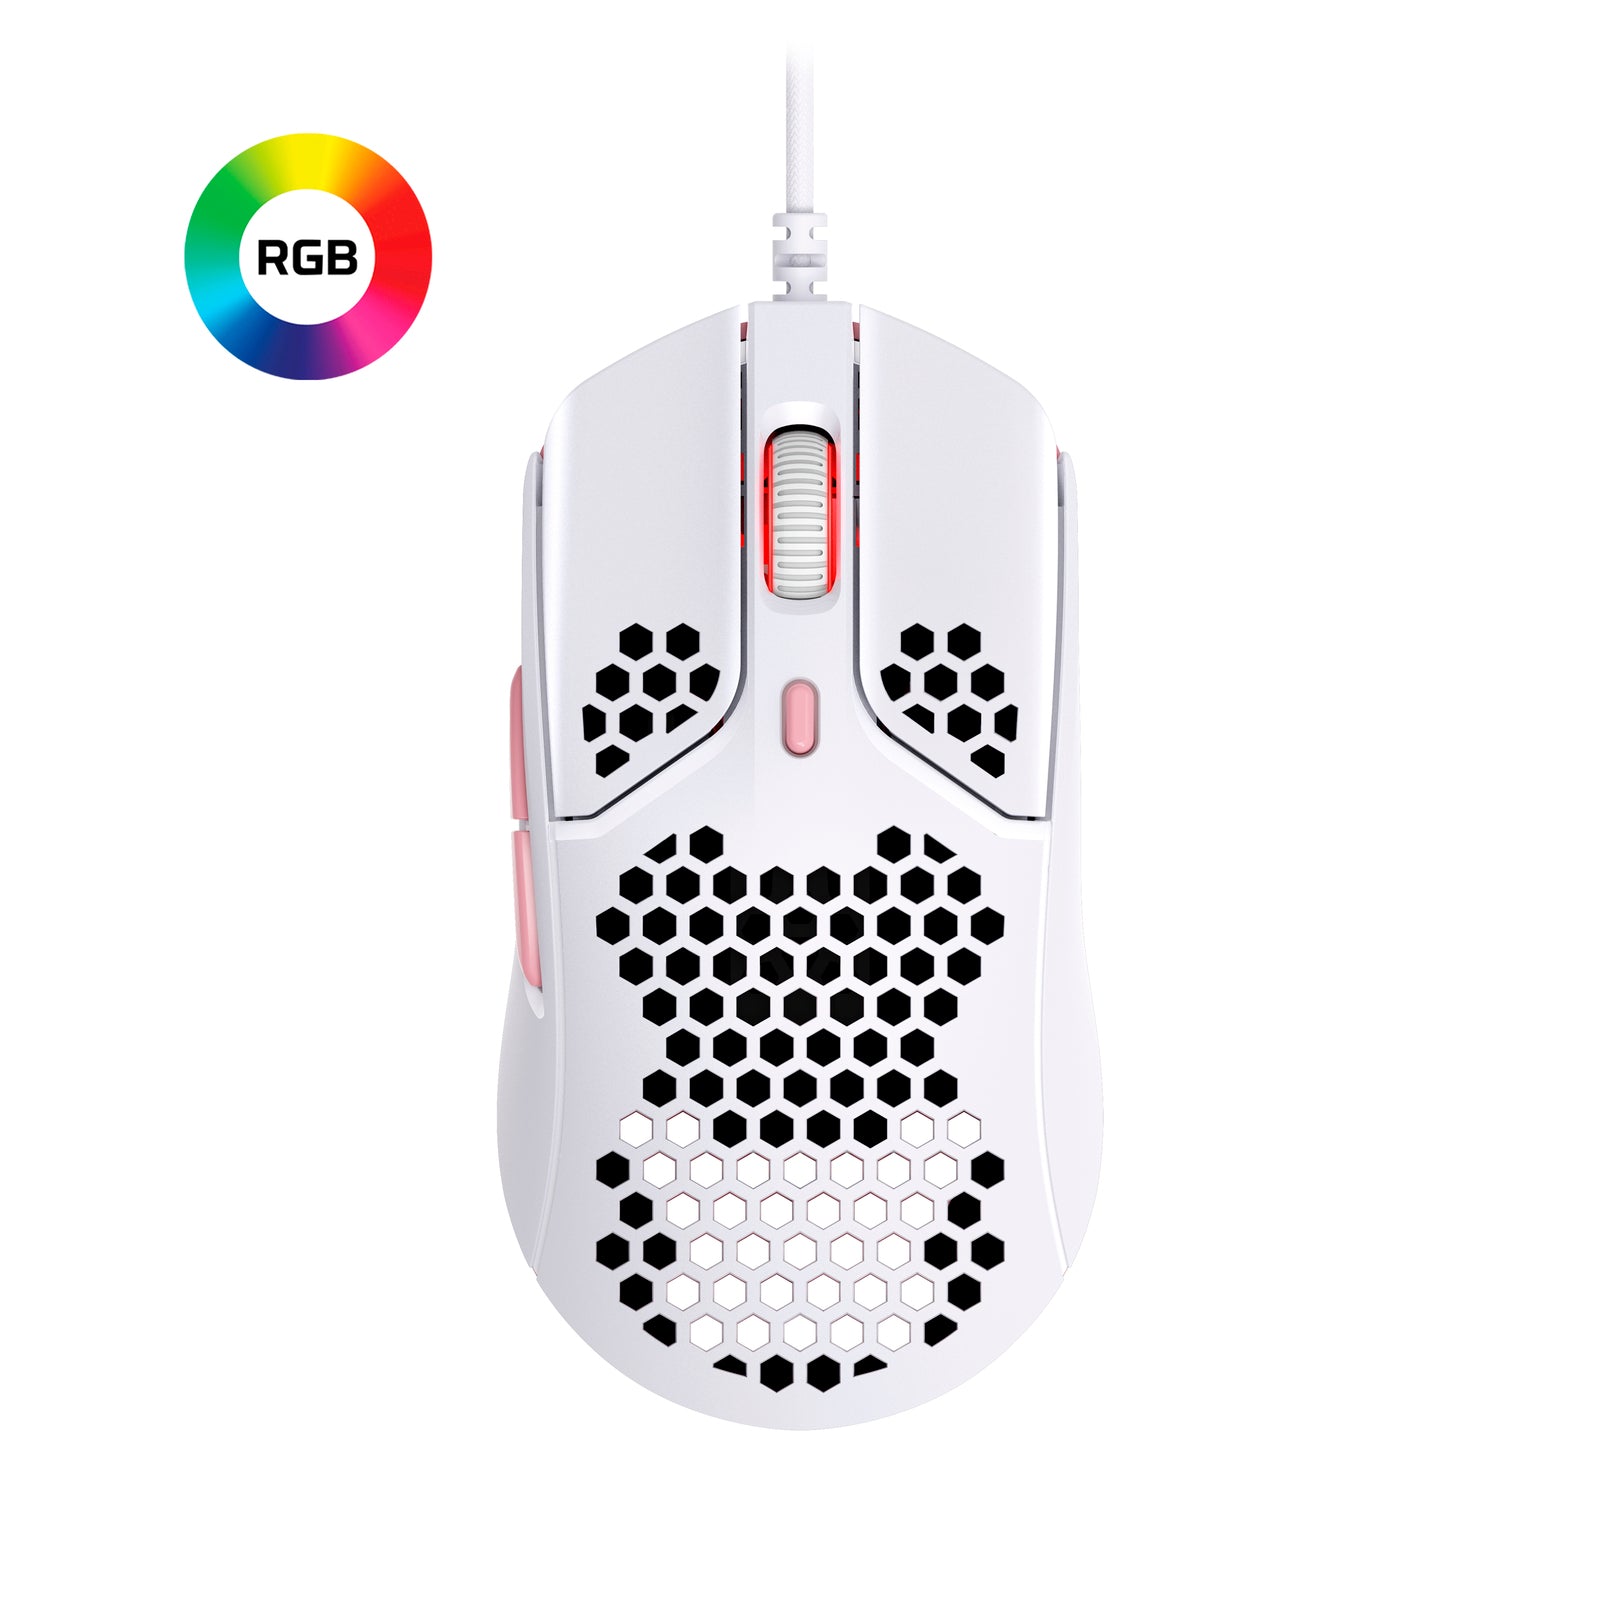 HyperX Pulsefire Haste White-Pink Gaming Mouse Top Down View